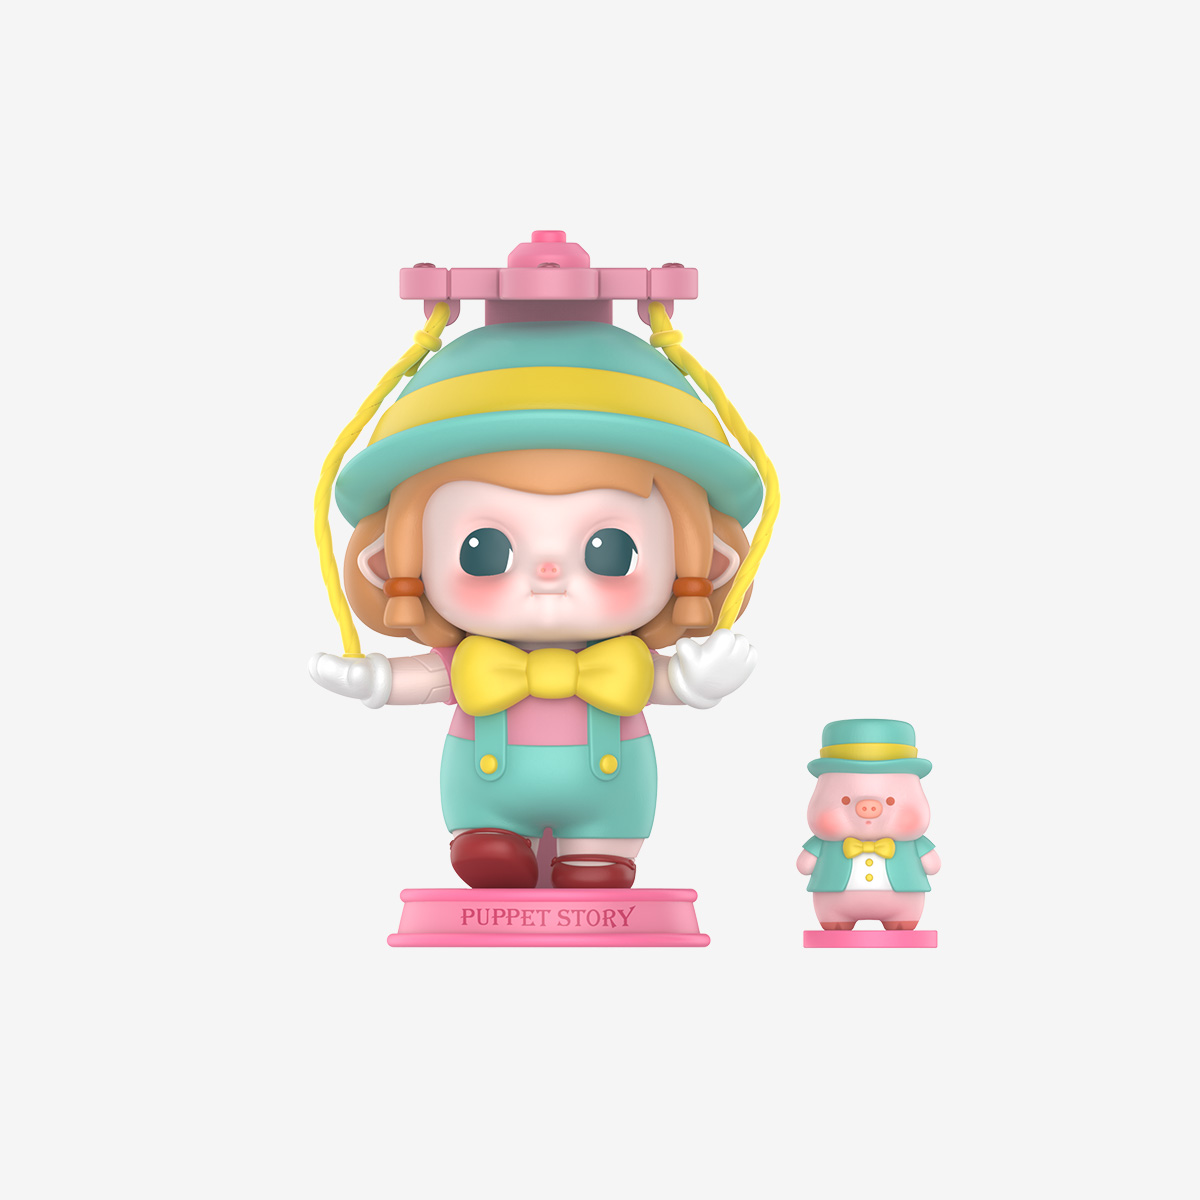 MINICO My Toy Party Series - POP MART (United States)